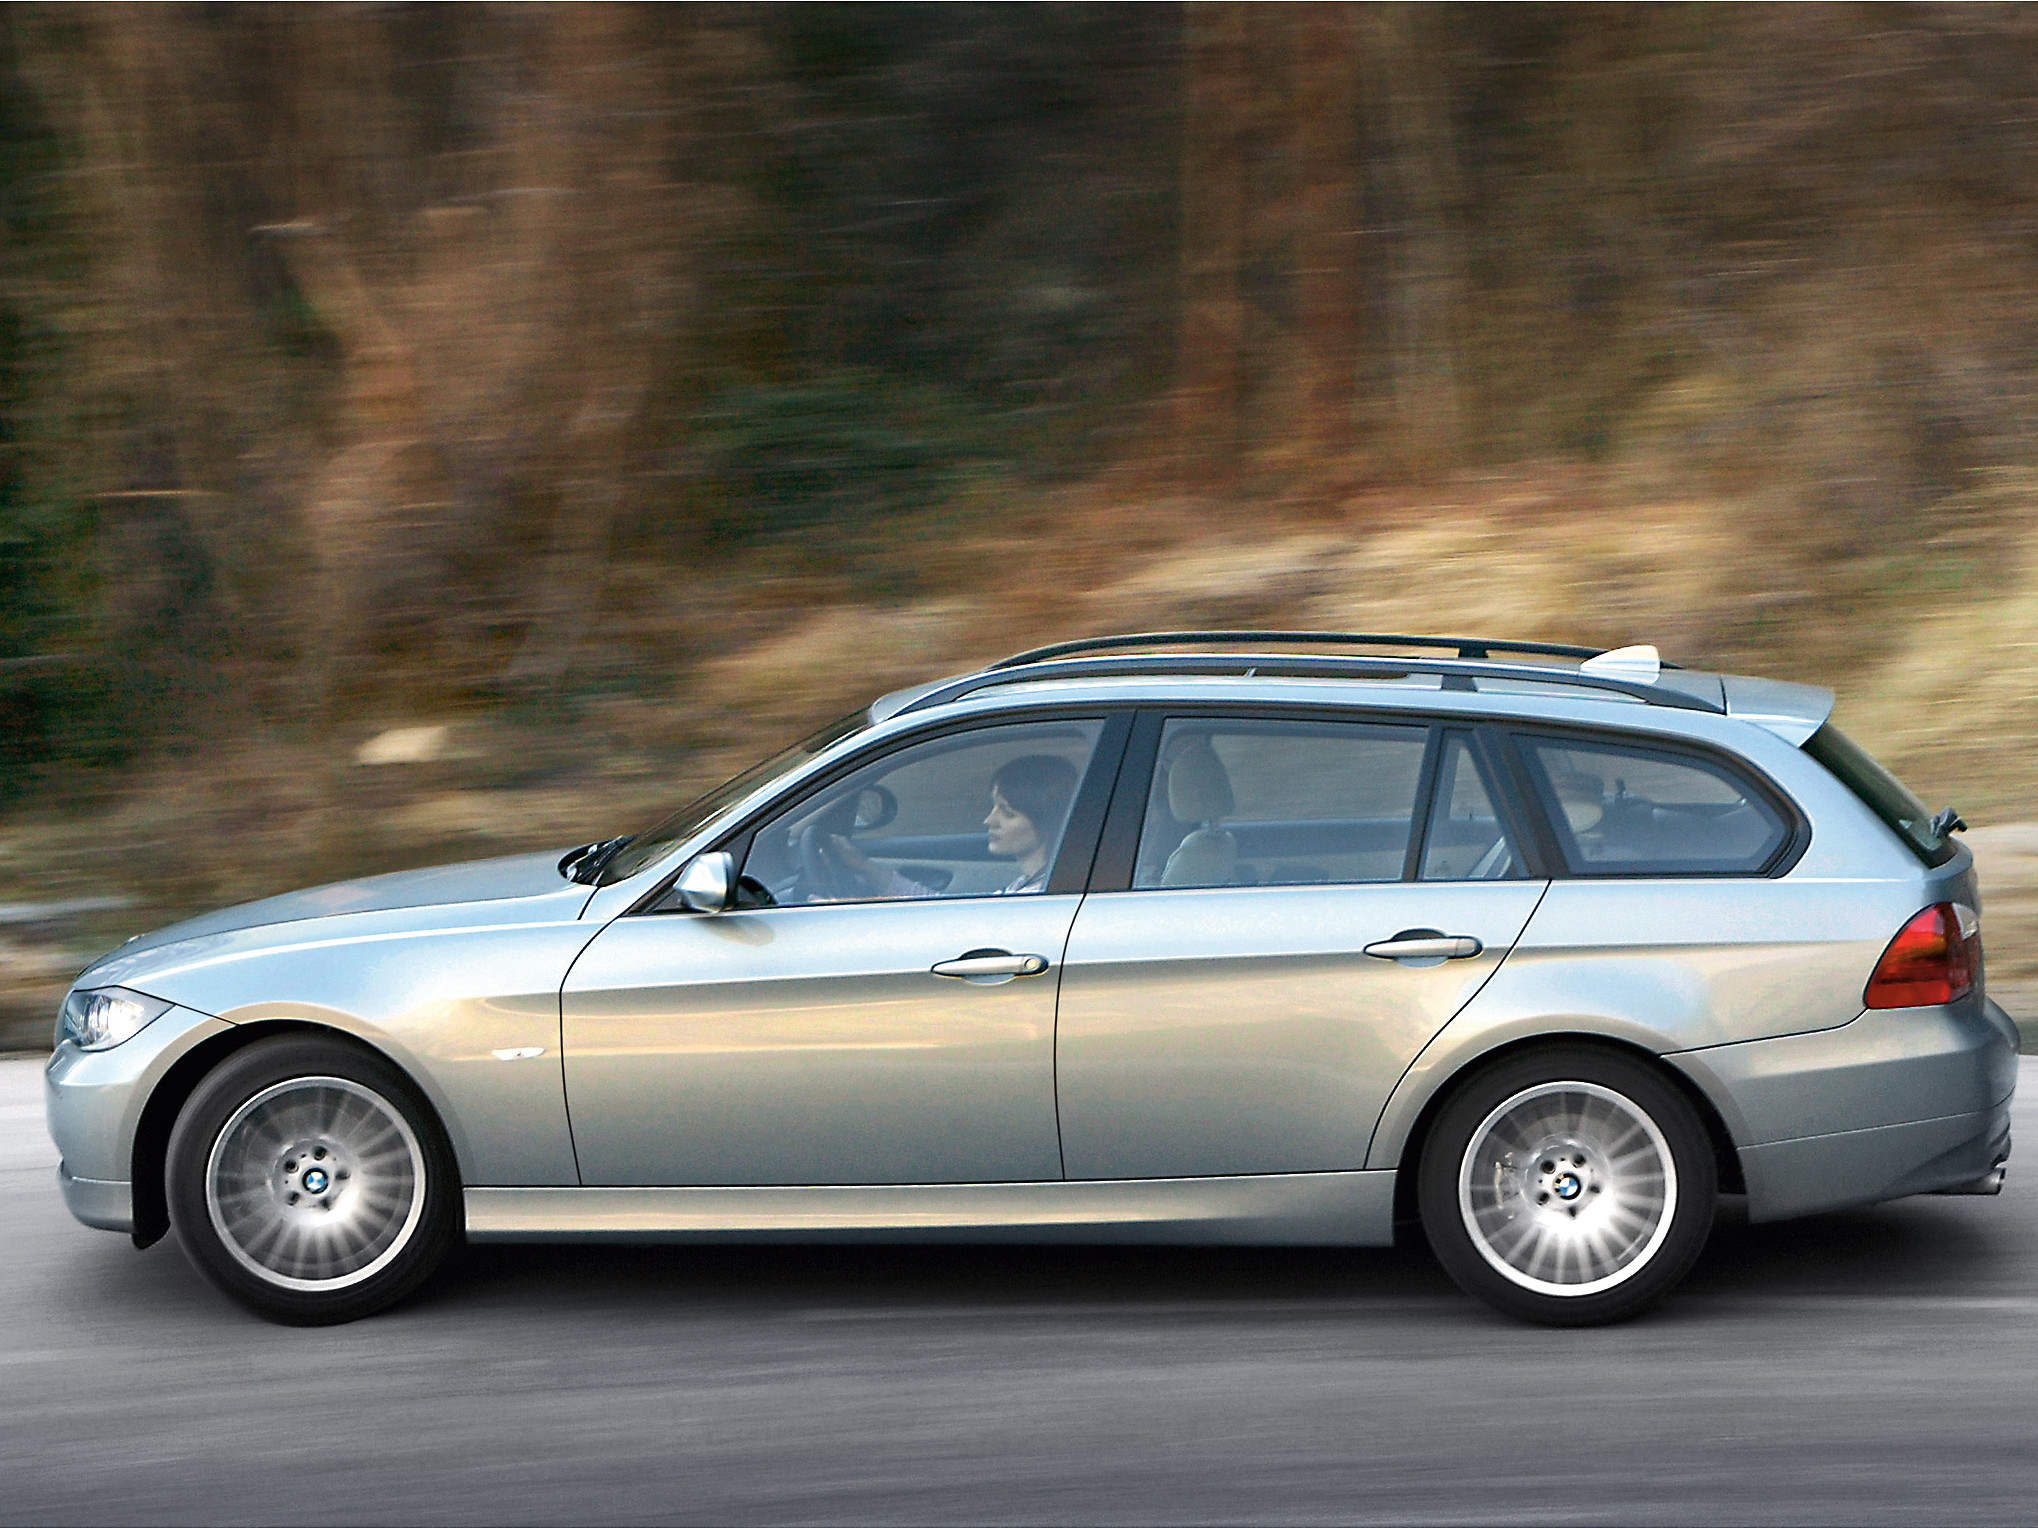 Used BMW 3-Series (E91) Touring buyer's guide - Practical Caravan